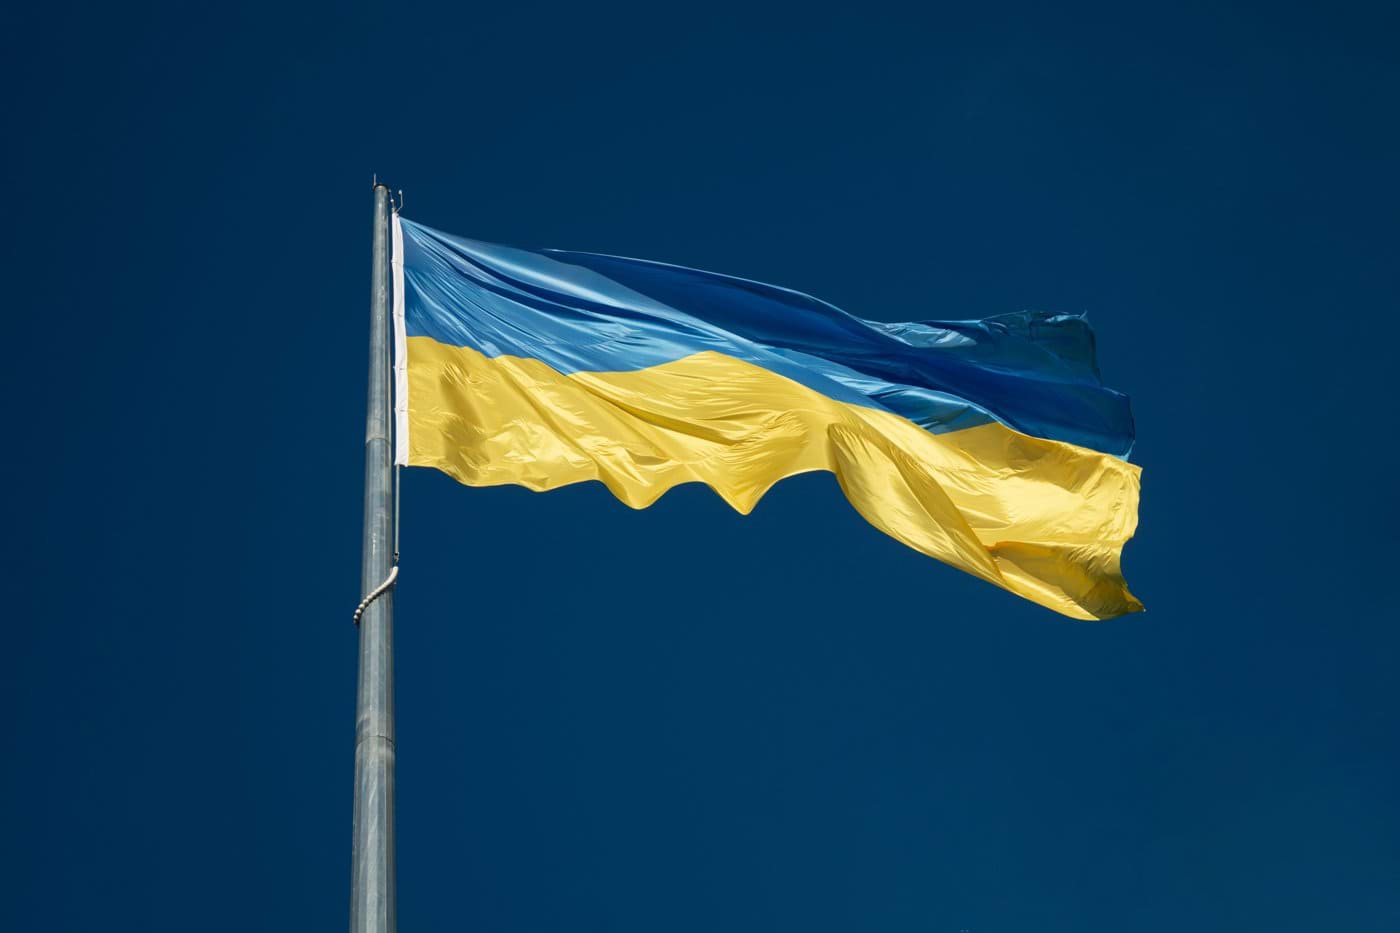 the flag of ukraine is flying high in the sky